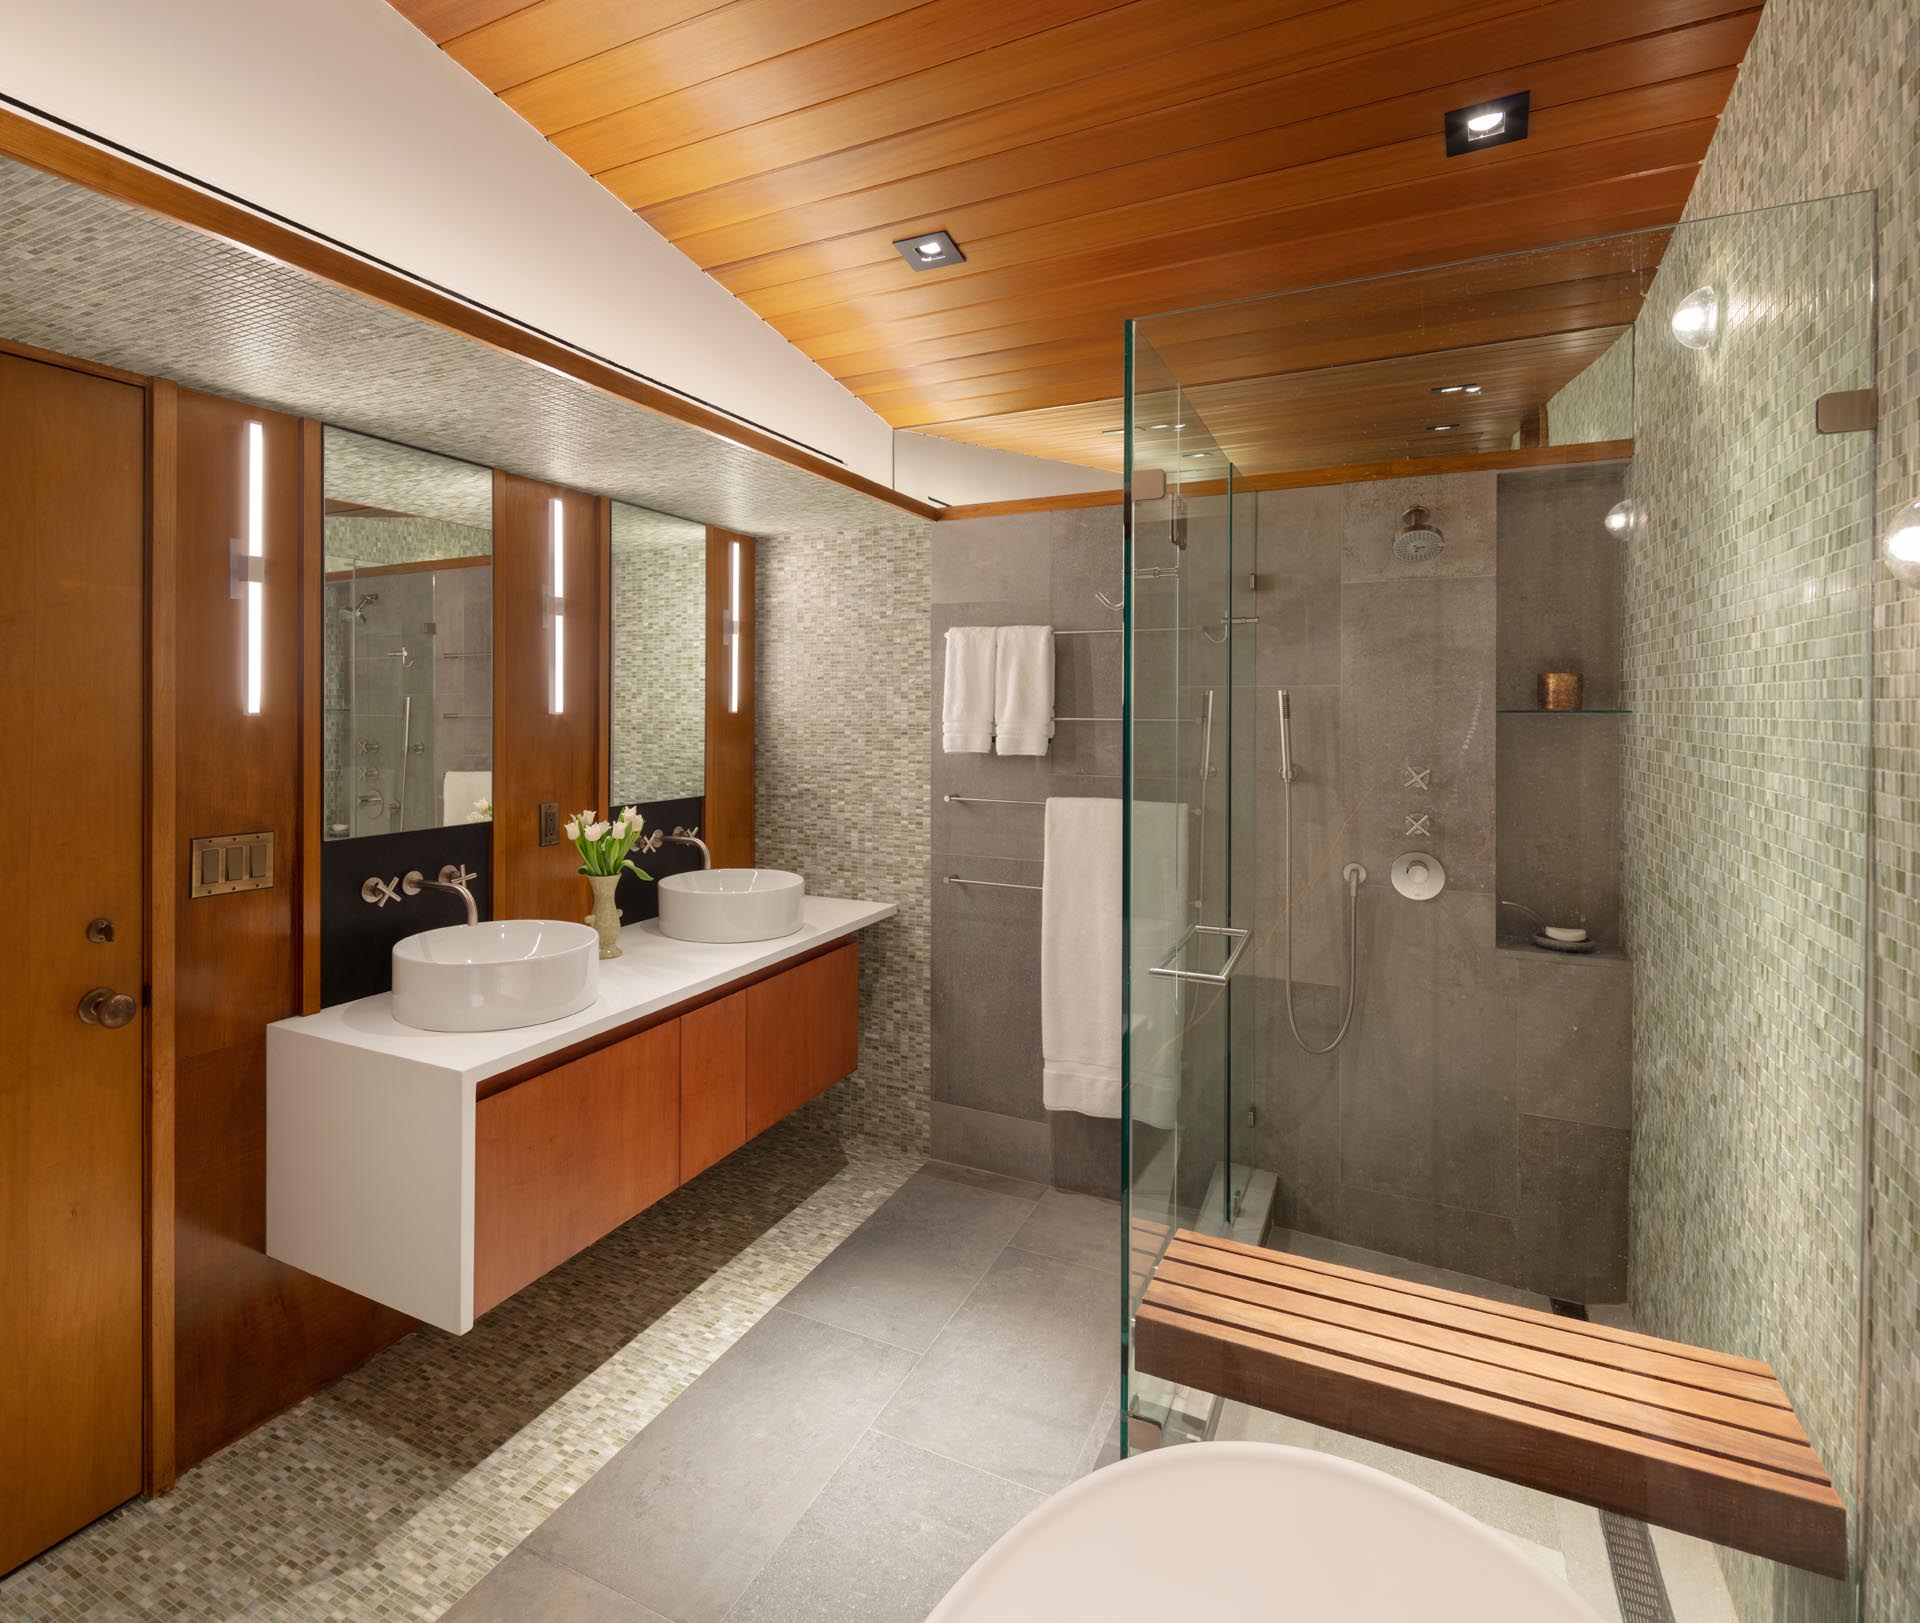 In this modern bathroom, there's a wood ceiling that complements the vanity, while a frameless shower screen provides separation from the bathtub.